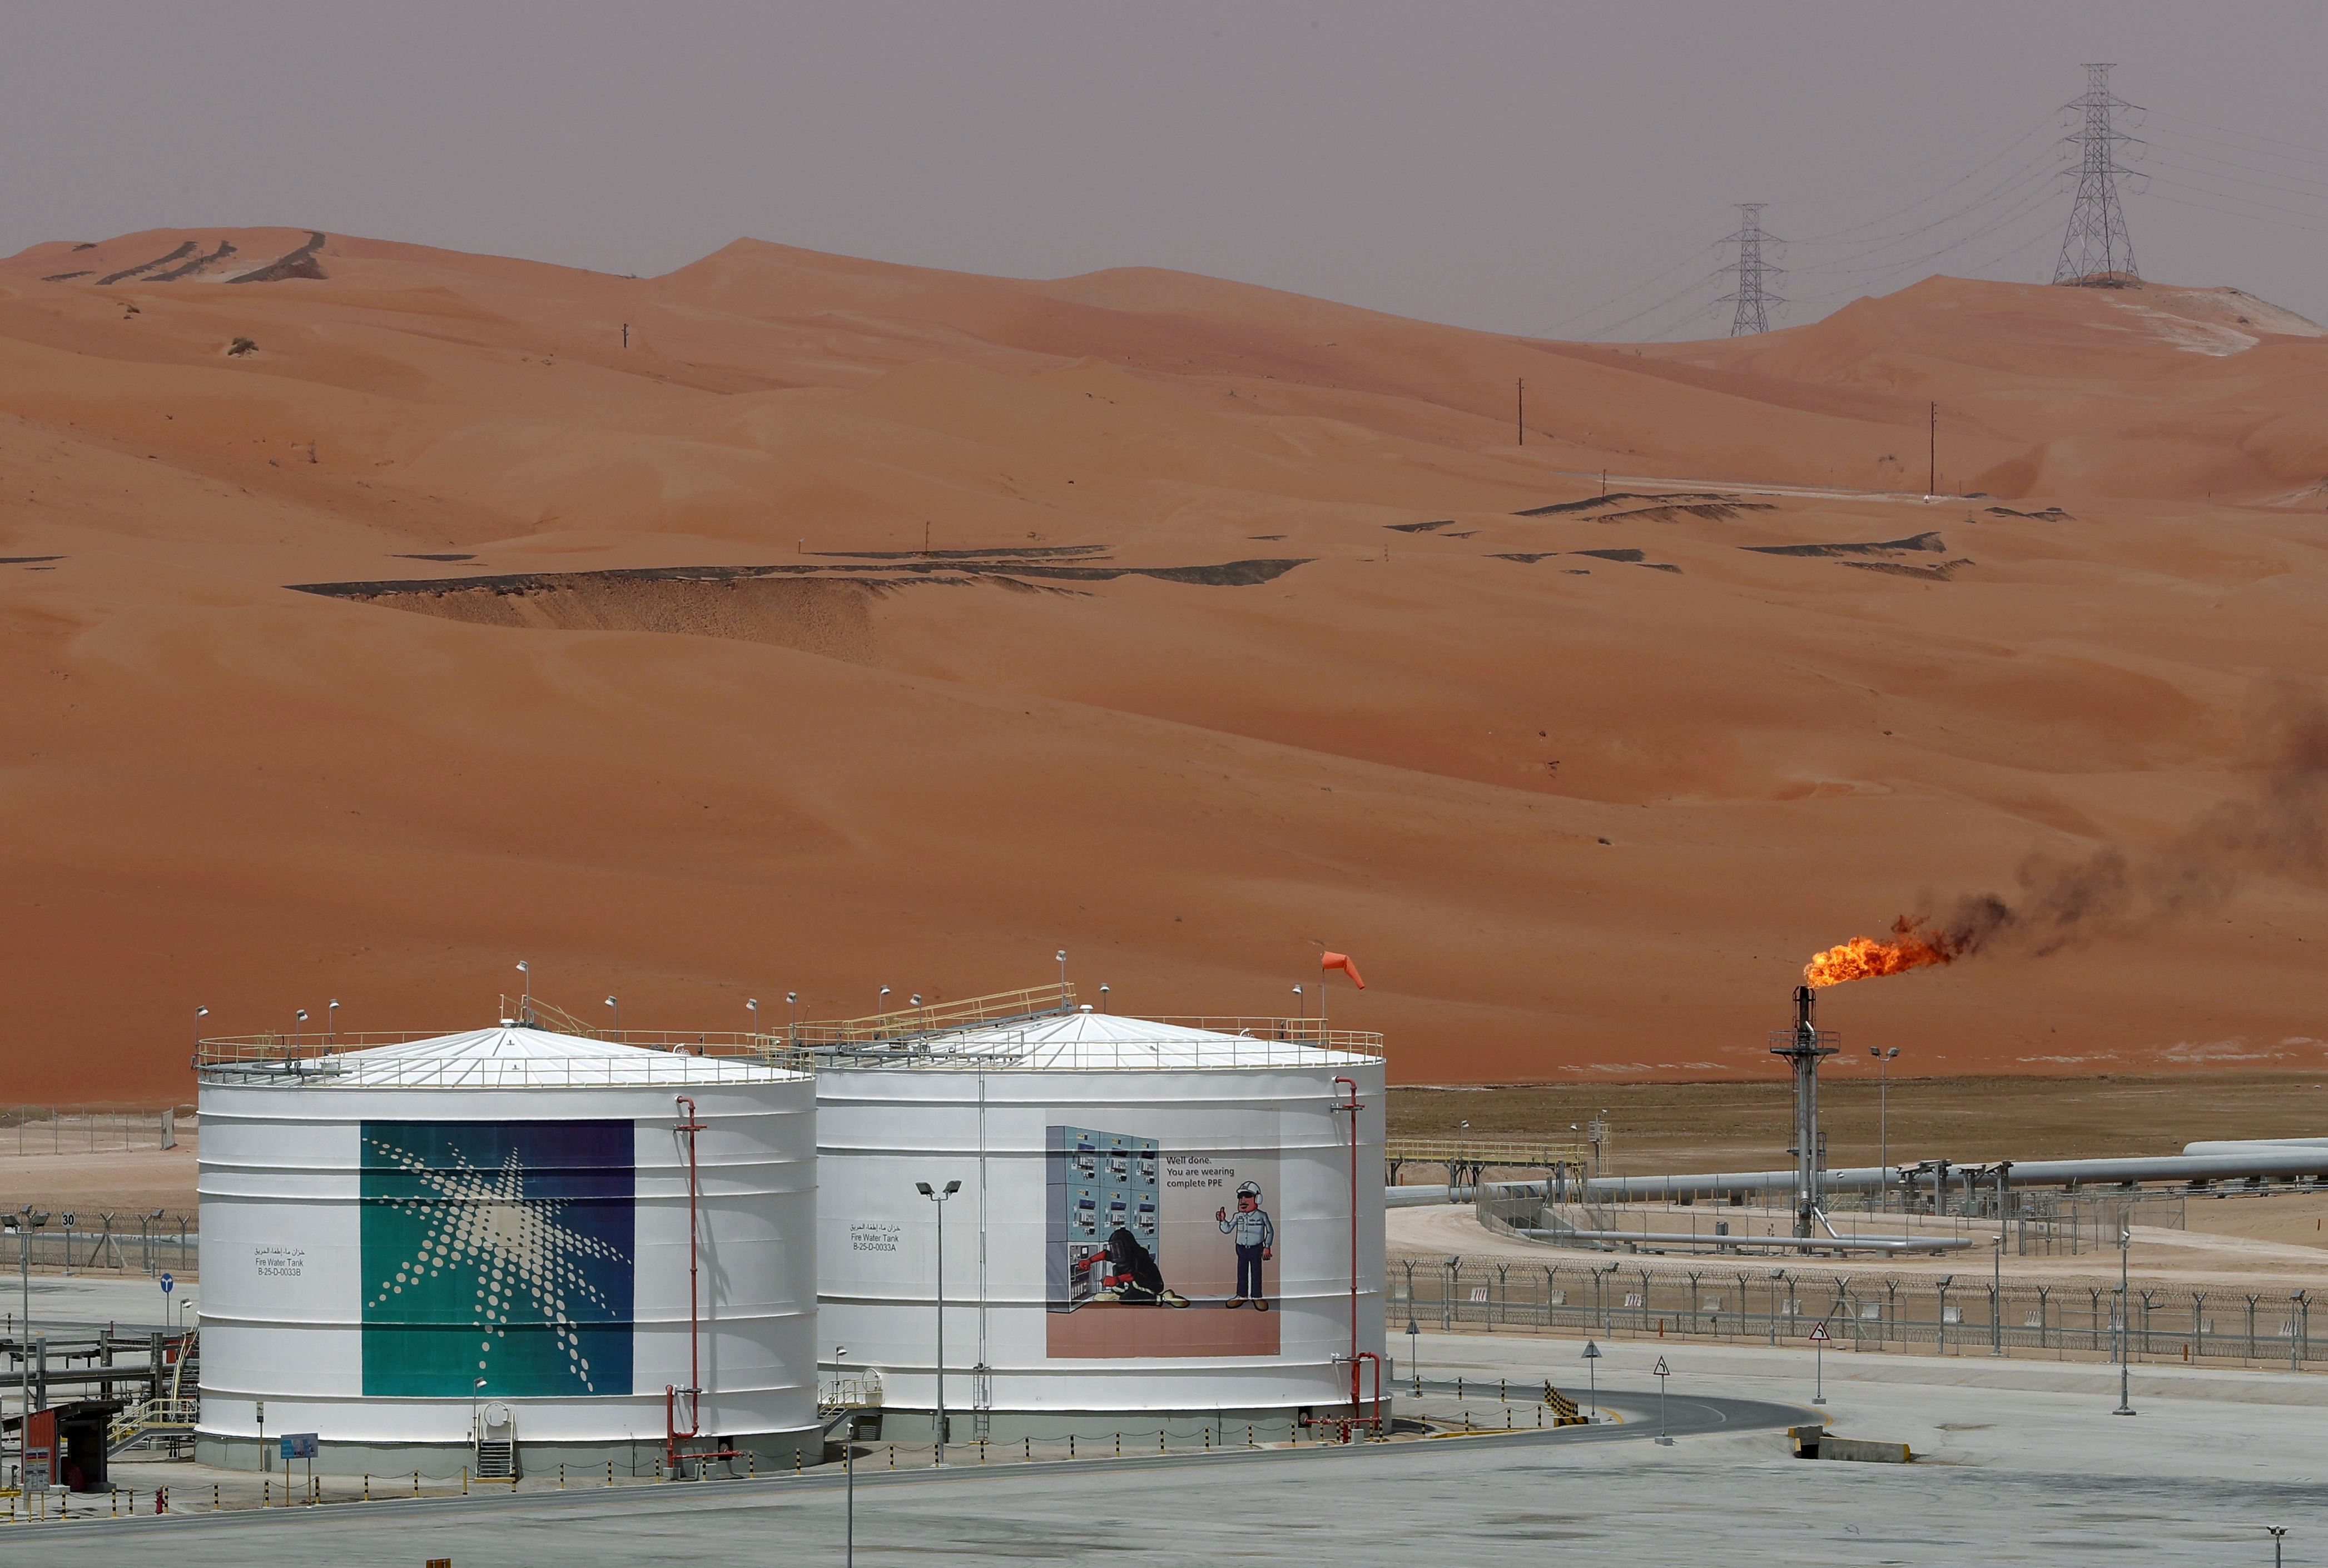 Production facility is seen at Saudi Aramco's Shaybah oilfield in the Empty Quarter